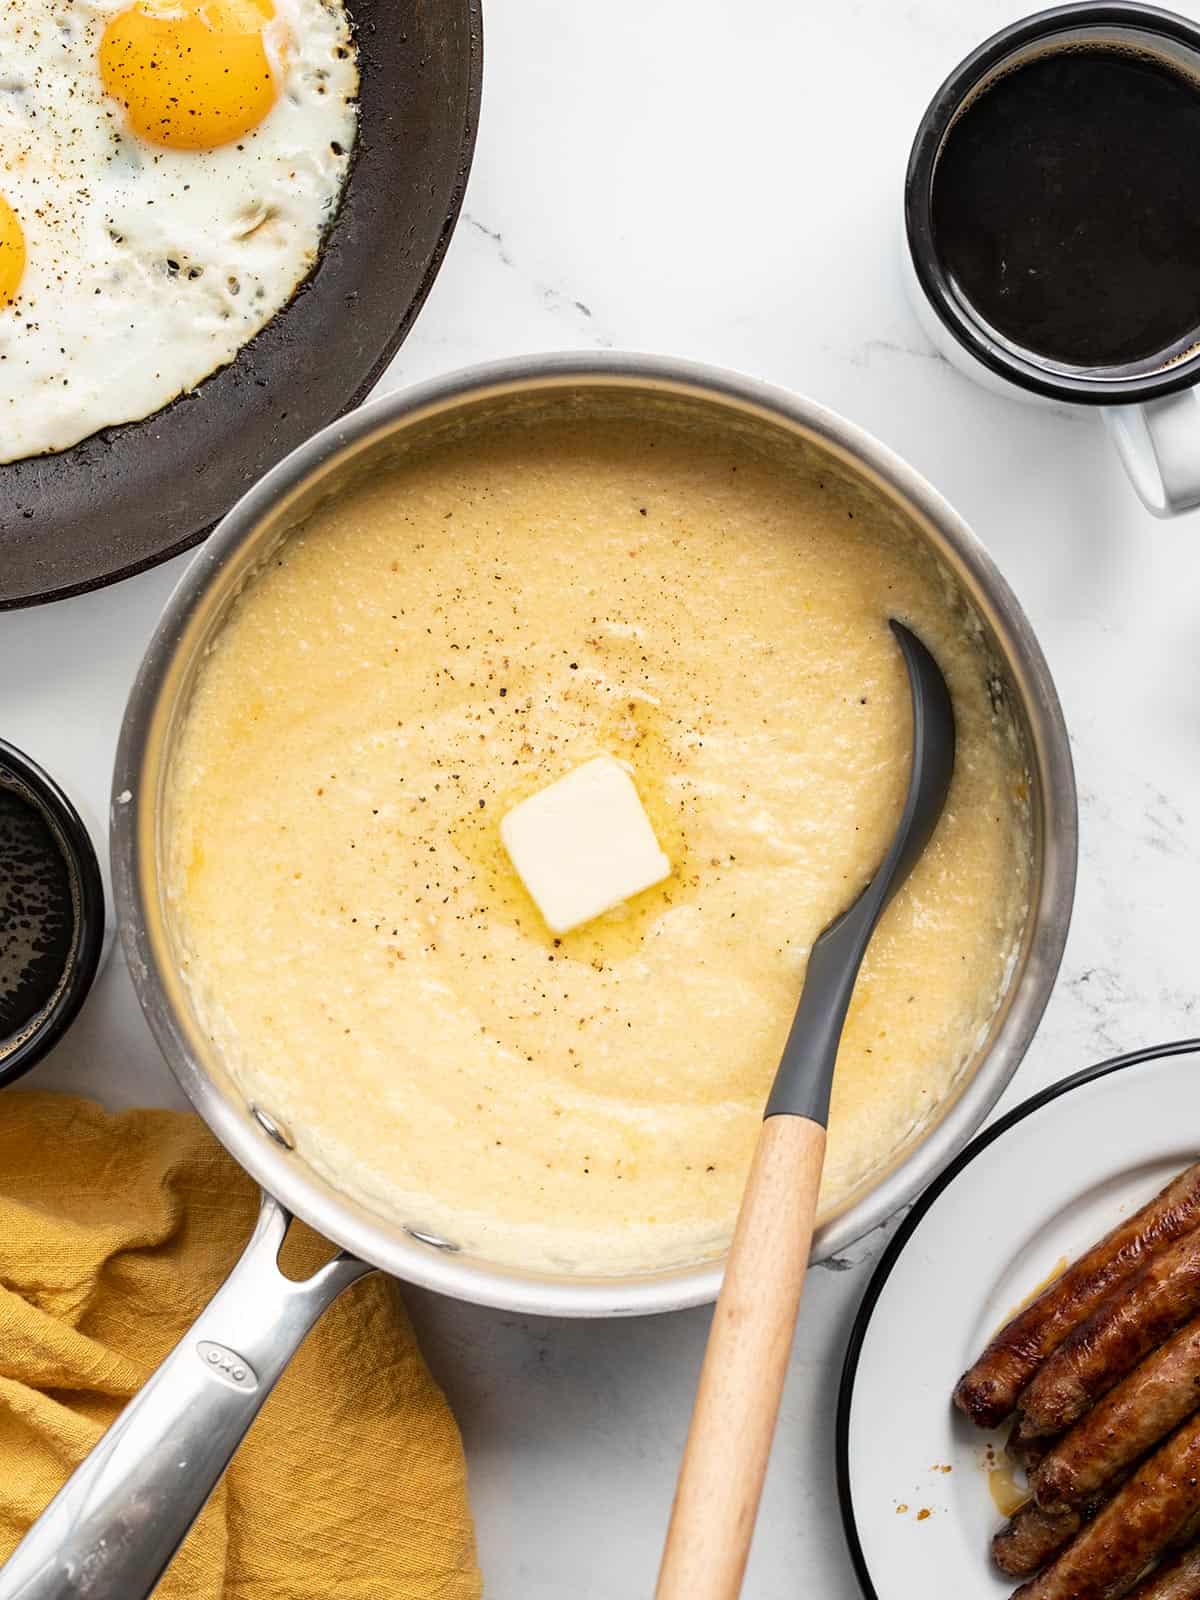 A pot full of cheese grits with a pat of butter, other breakfast items on the sides